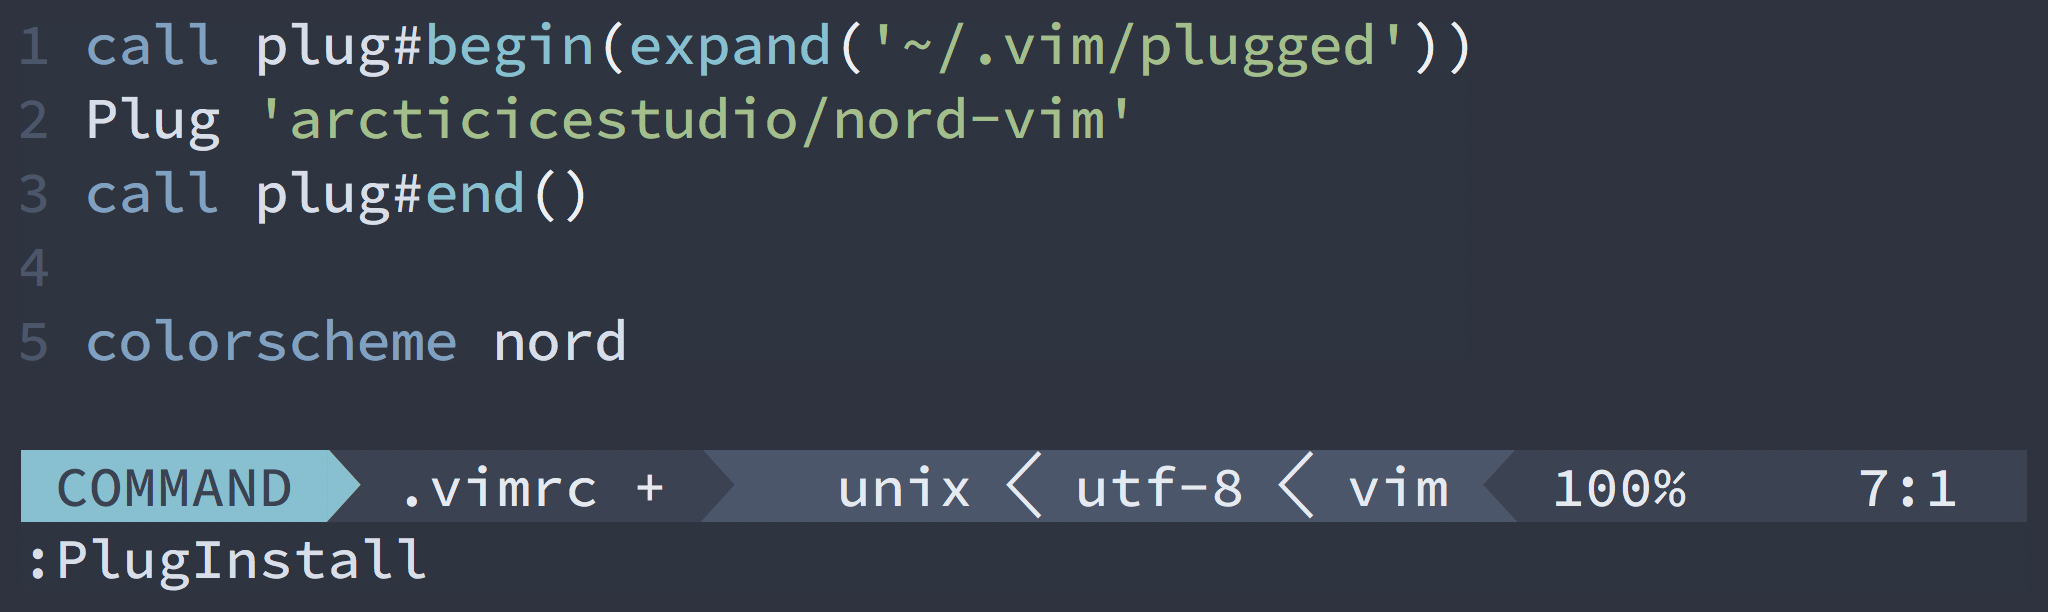 Screenshot showing an example of a Vim configuration to setup Nord through the vim-plug plugin manager